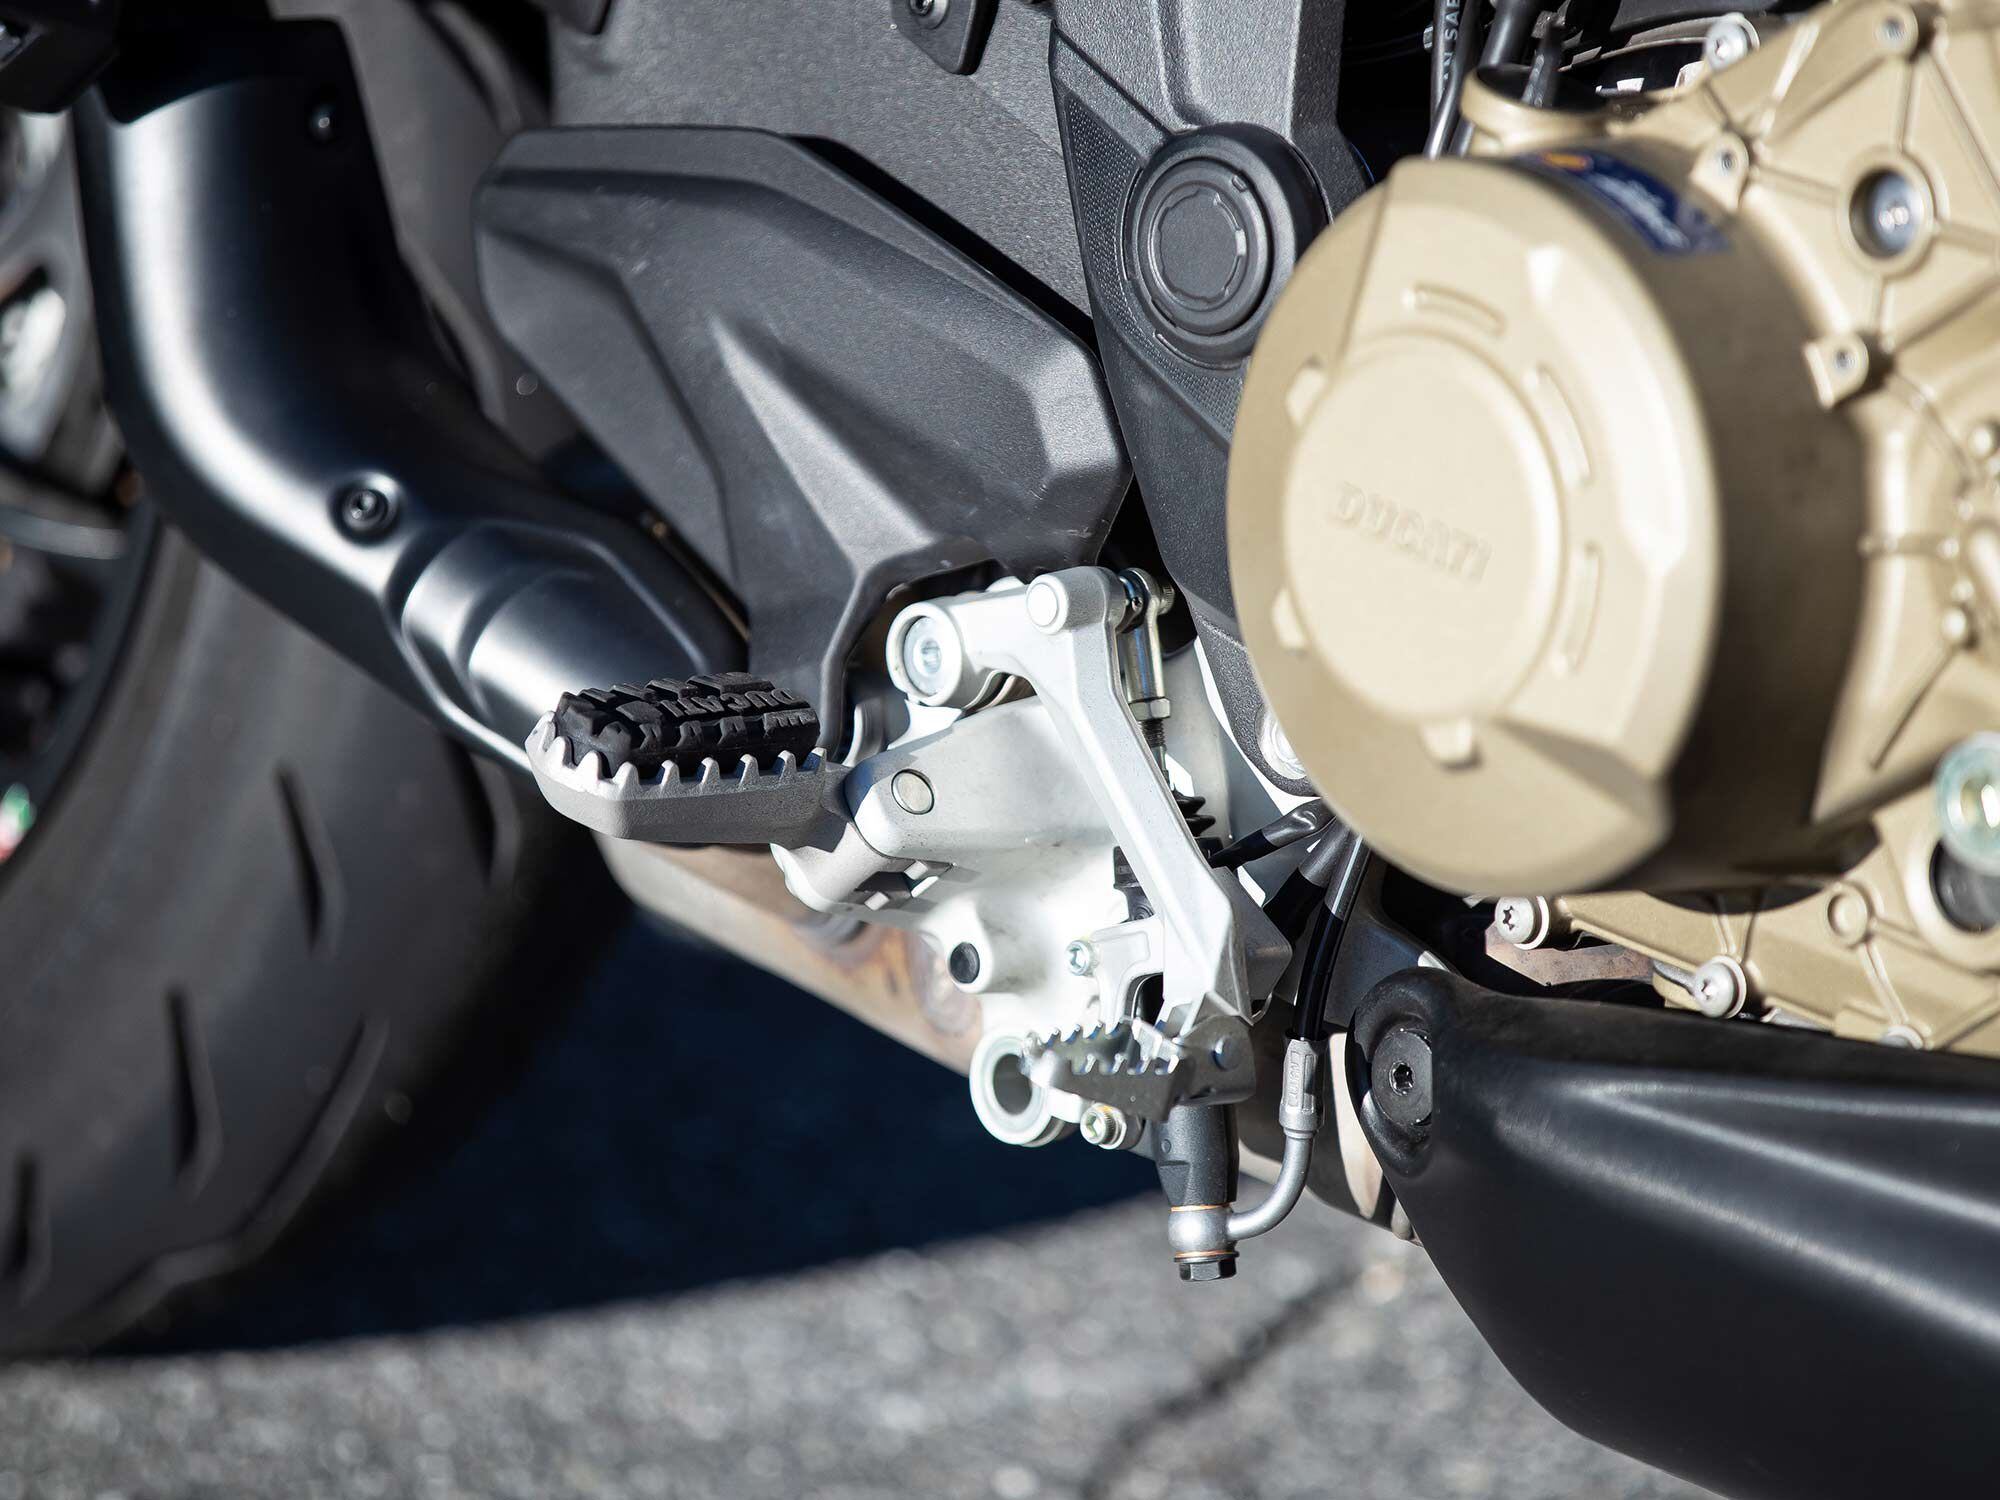 The rider’s foot controls have shifted up and rearward for more cornering clearance. We prefer the everyday comfort afforded from the standard model’s setup.